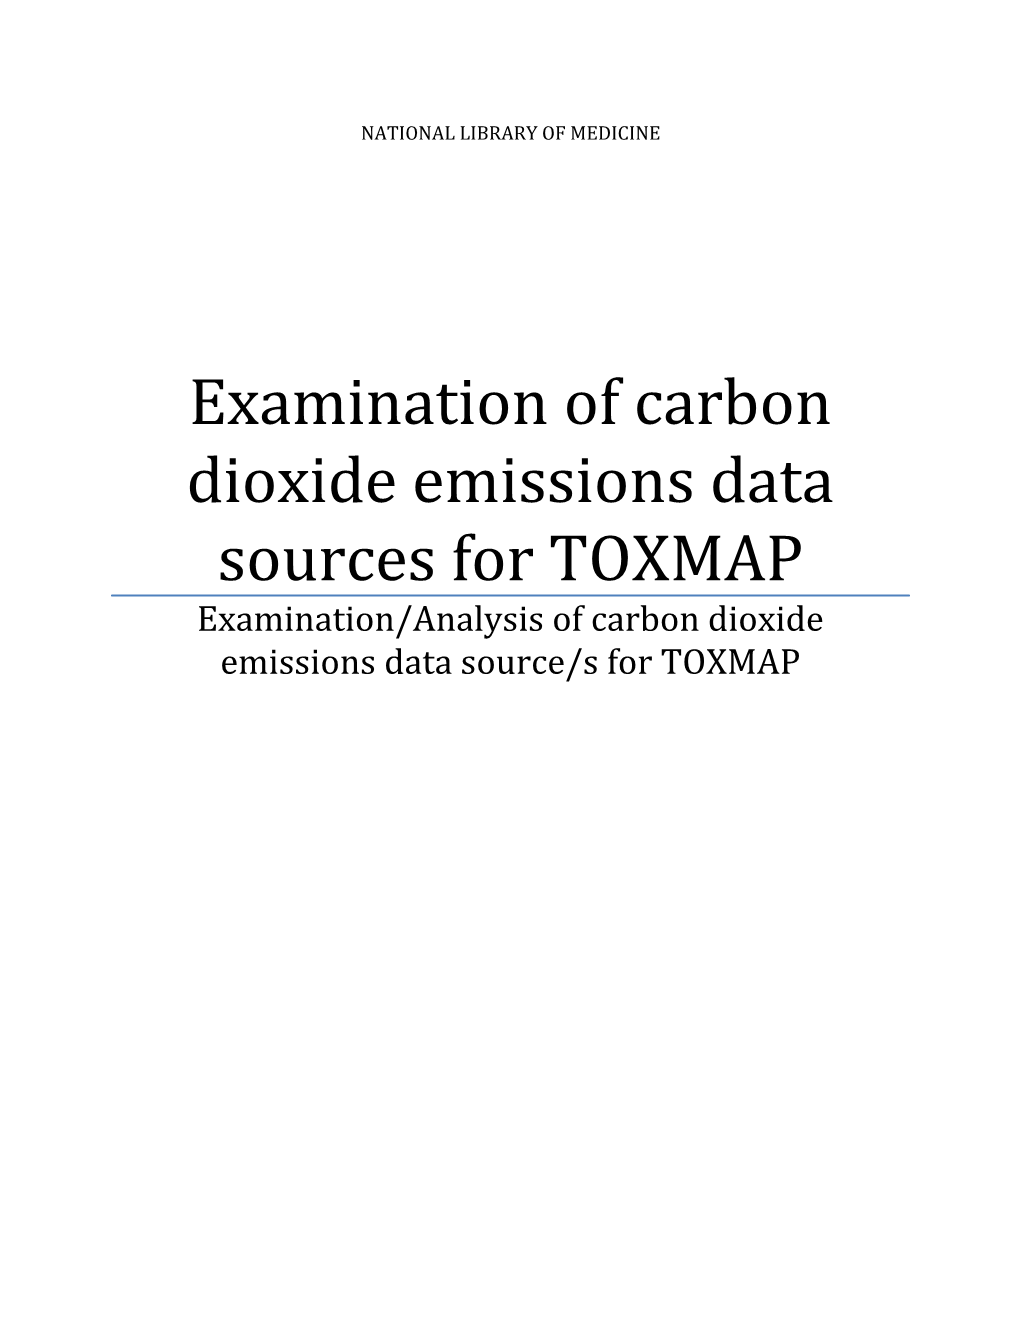 Examination of Carbon Dioxide Emissions Data Sources for TOXMAP